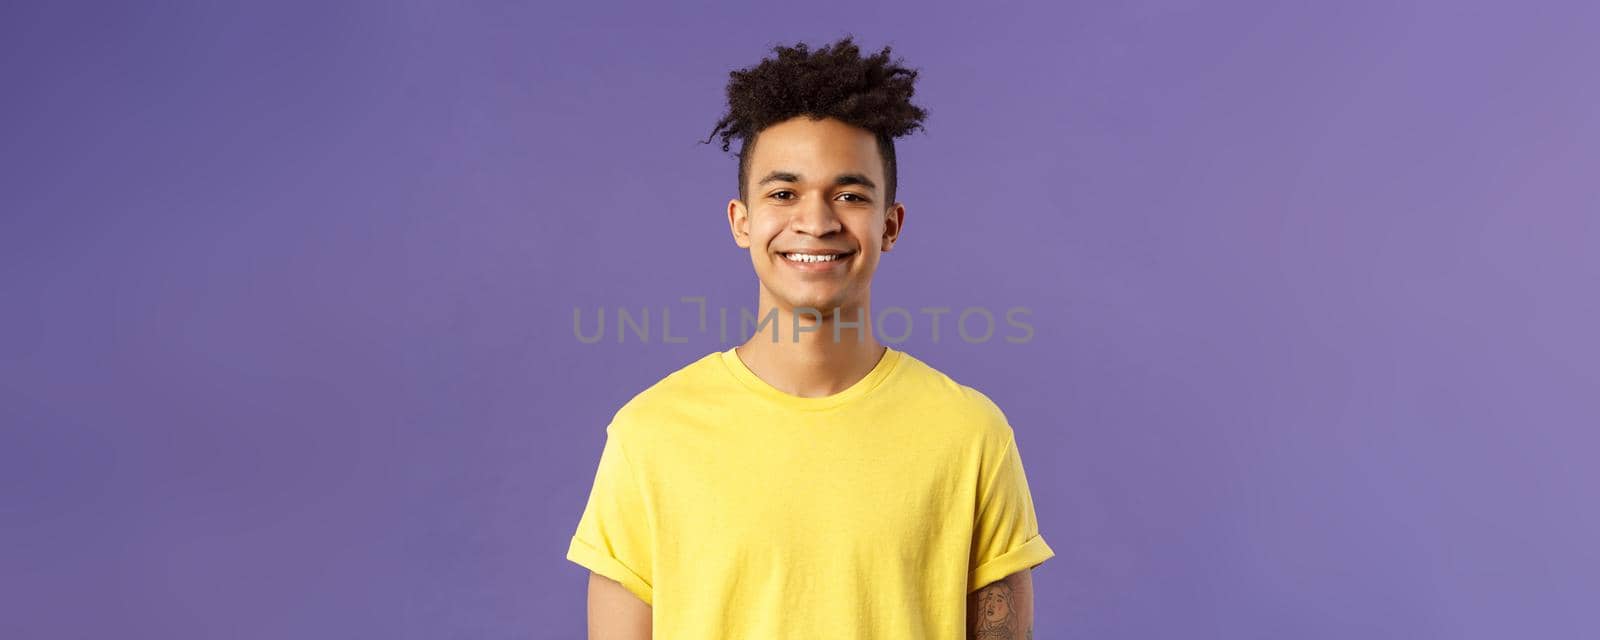 Close-up portrait of nice, friendly-looking hispanic male student in yellow t-shirt, grinning delighted, look upbeat happy and positive, standing enthusiastic with beaming smile purple background.